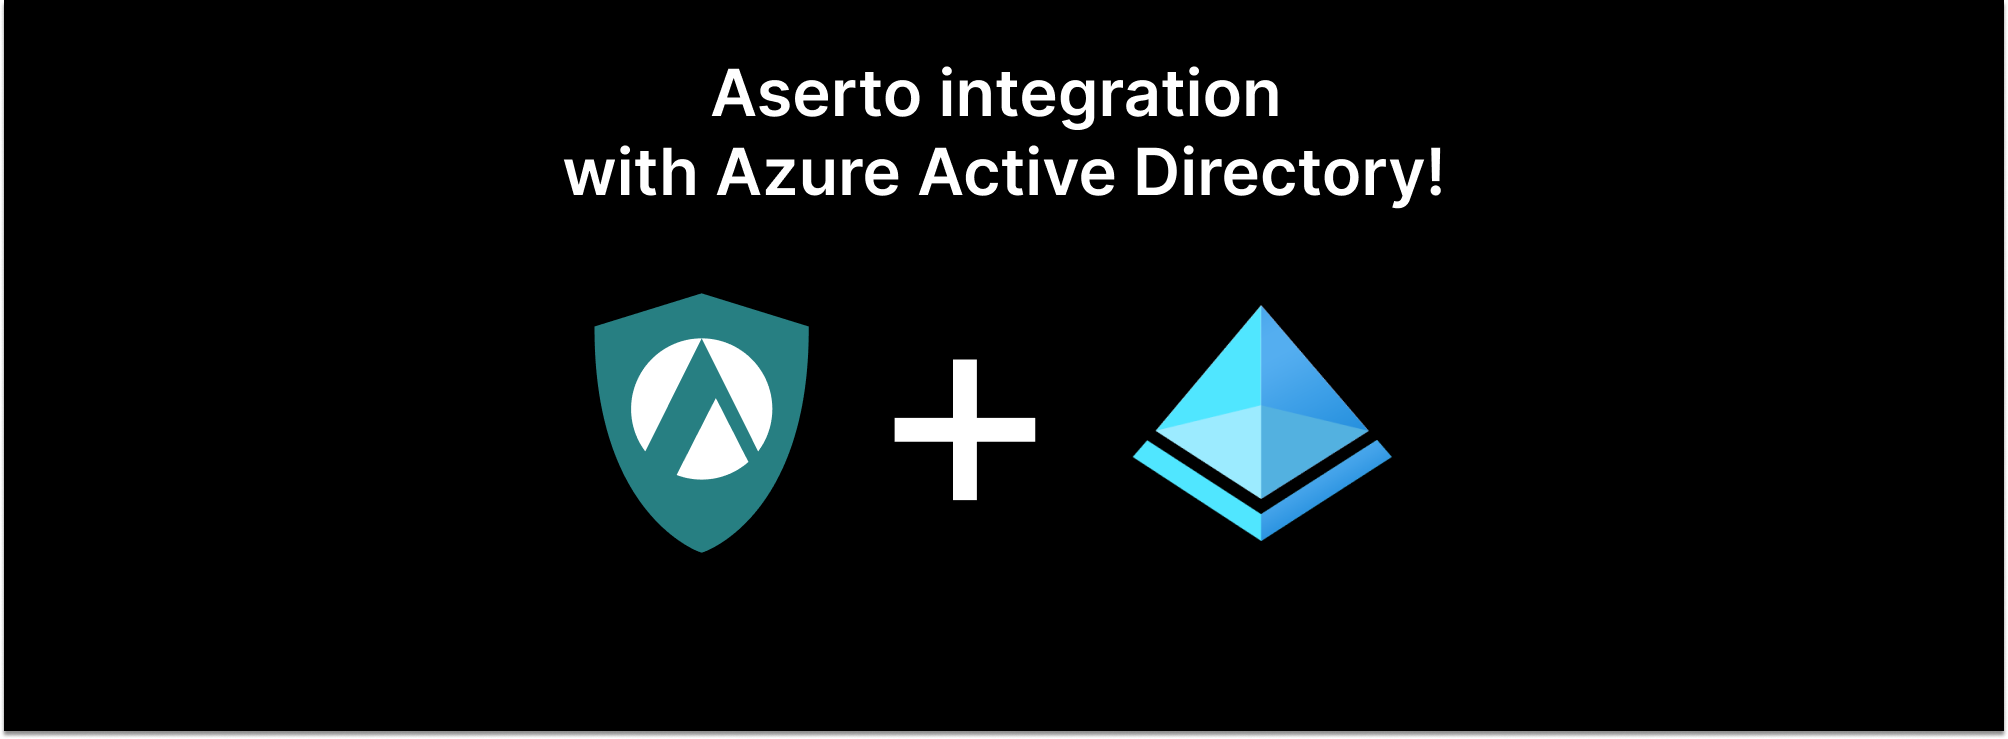 Aserto integration with Azure Active Directory